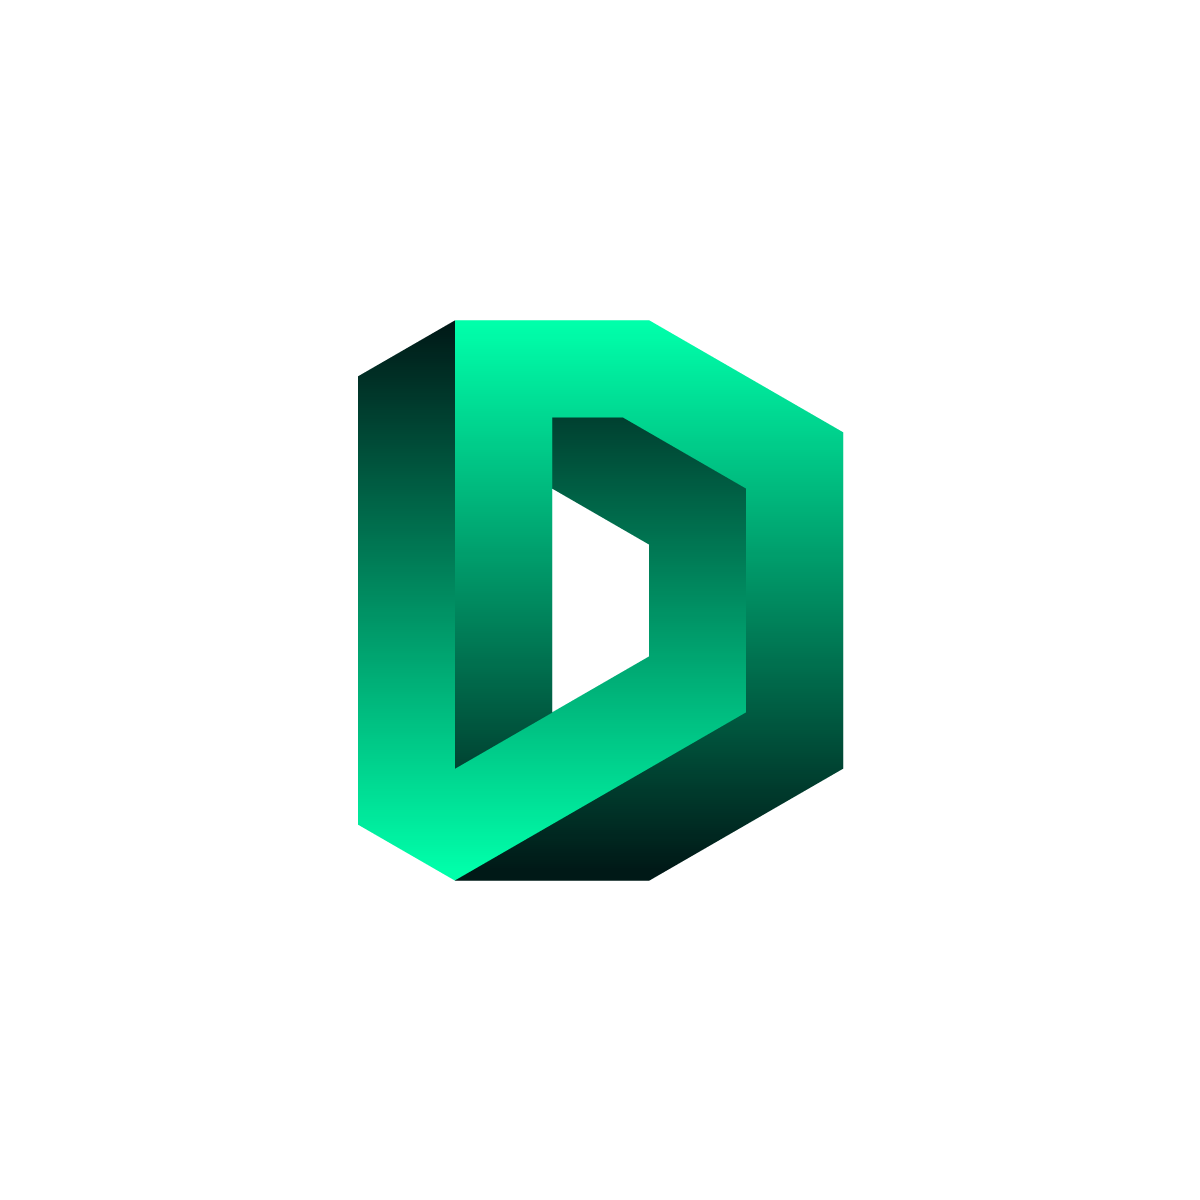 3D Letter D logo embodies depth, dimension, and excellence, meticulously crafted to make a bold industry statement with a sleek and impactful visual identity.